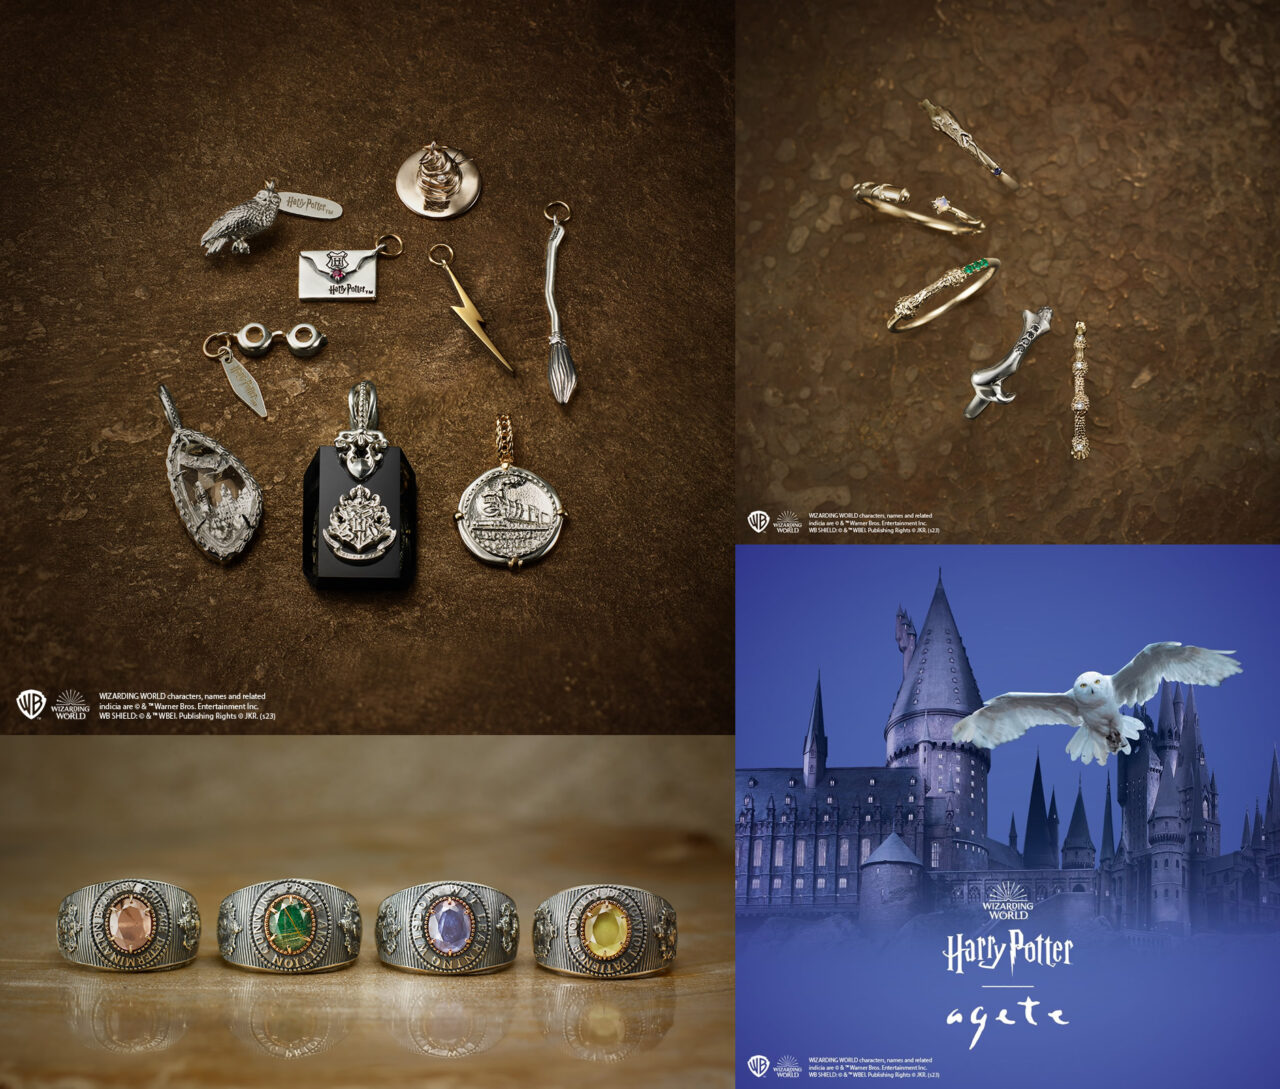 agete x Harry Potter Four Dormitory Rings & Wand Rings & Hogwarts and Hedwig charms on sale from Friday 9 June 2023.